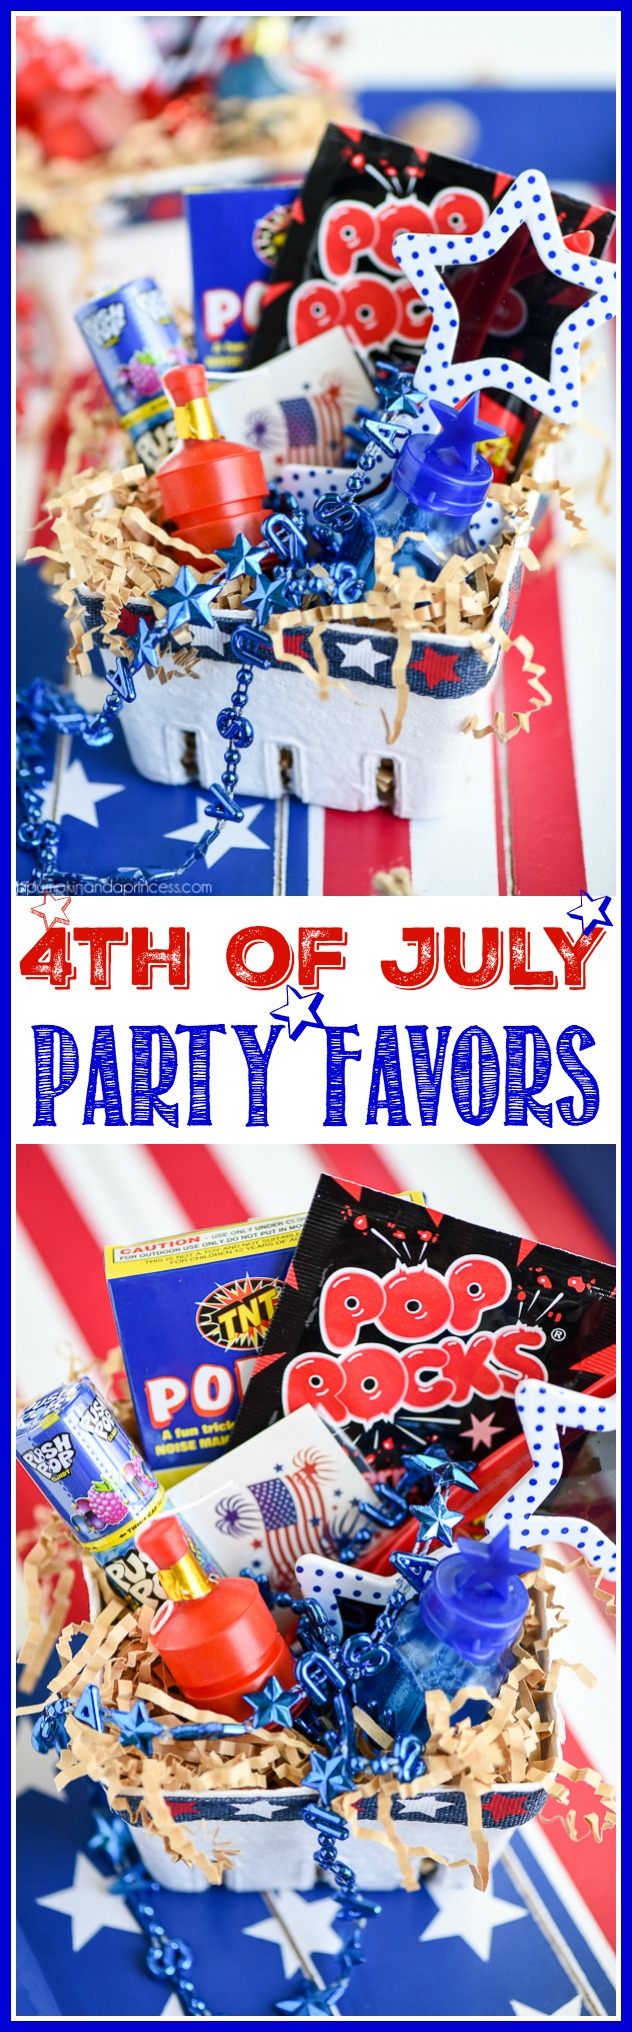 4th of July party favor baskets for kids – keep kids entertained while they wait for the parade or big fireworks show with this patriotic party favor basket